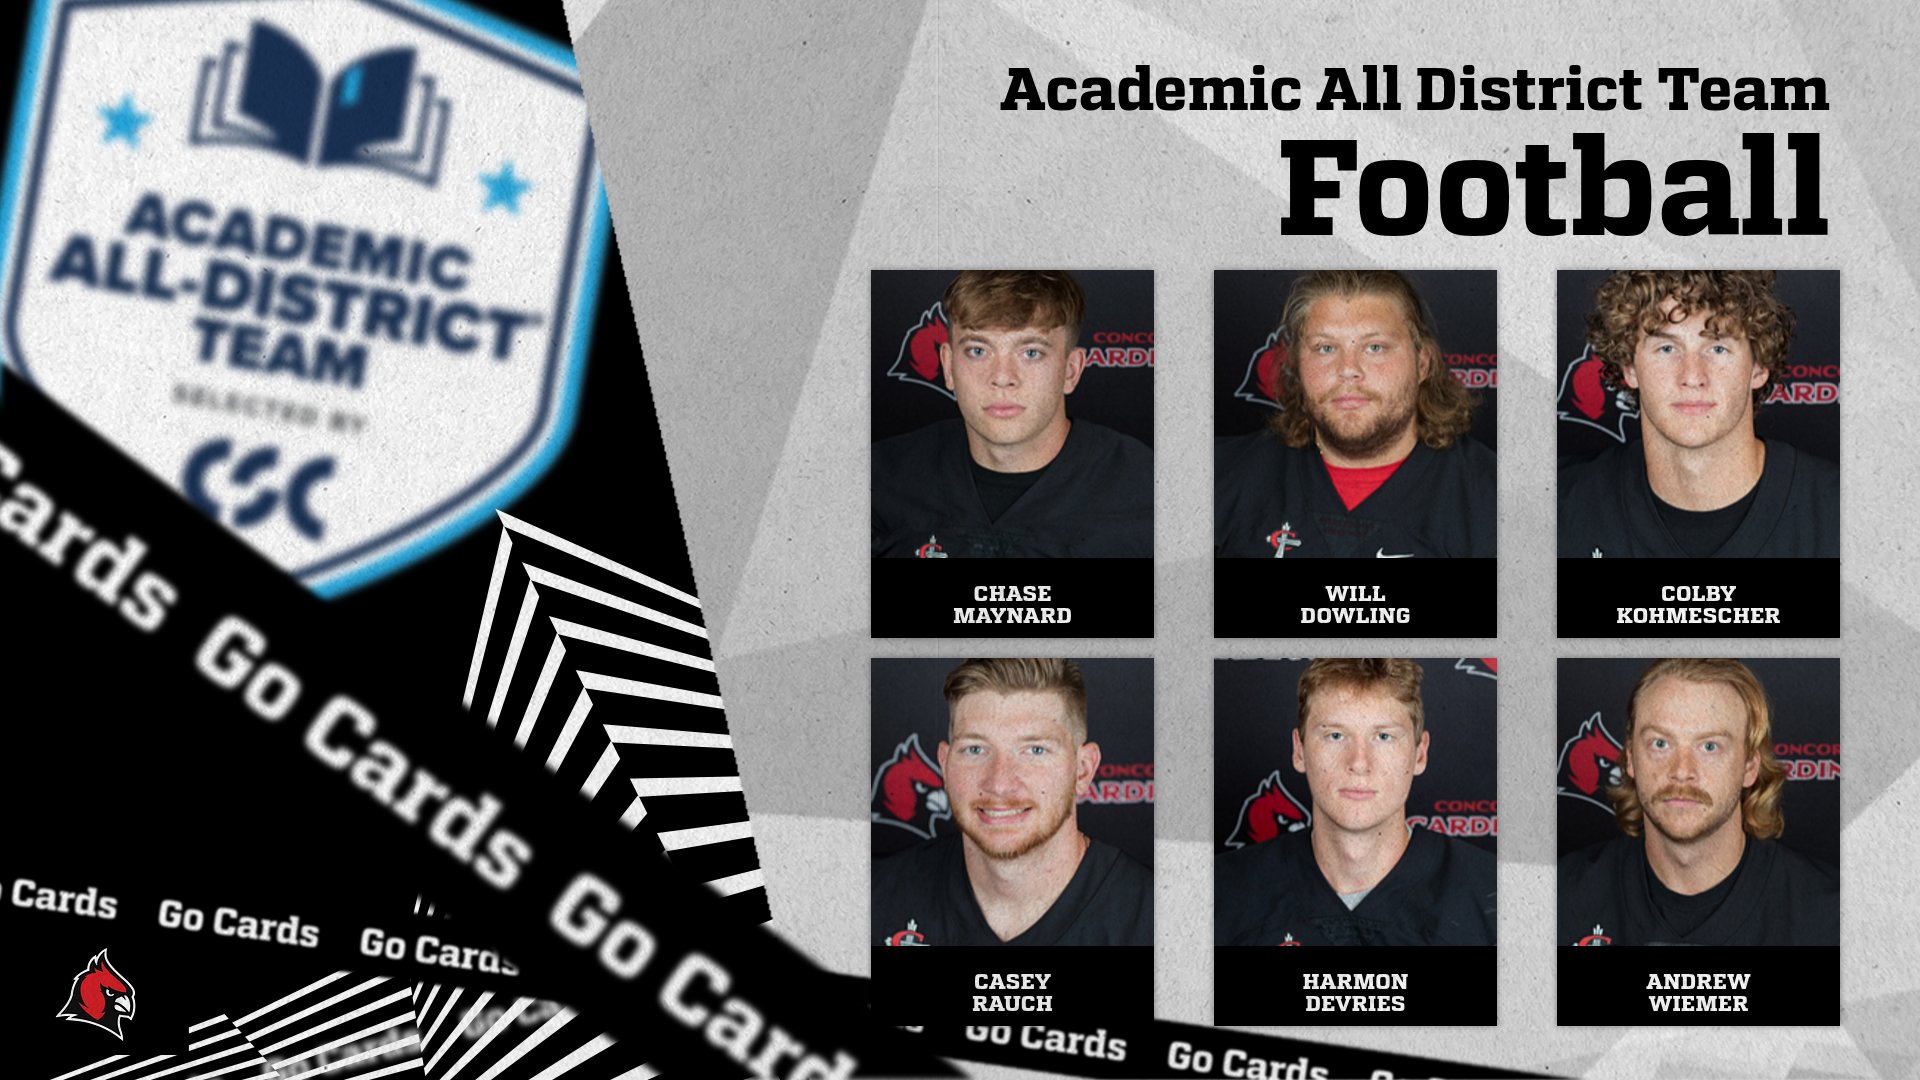 6 Football Student-Athletes named to CSC Academic All-District